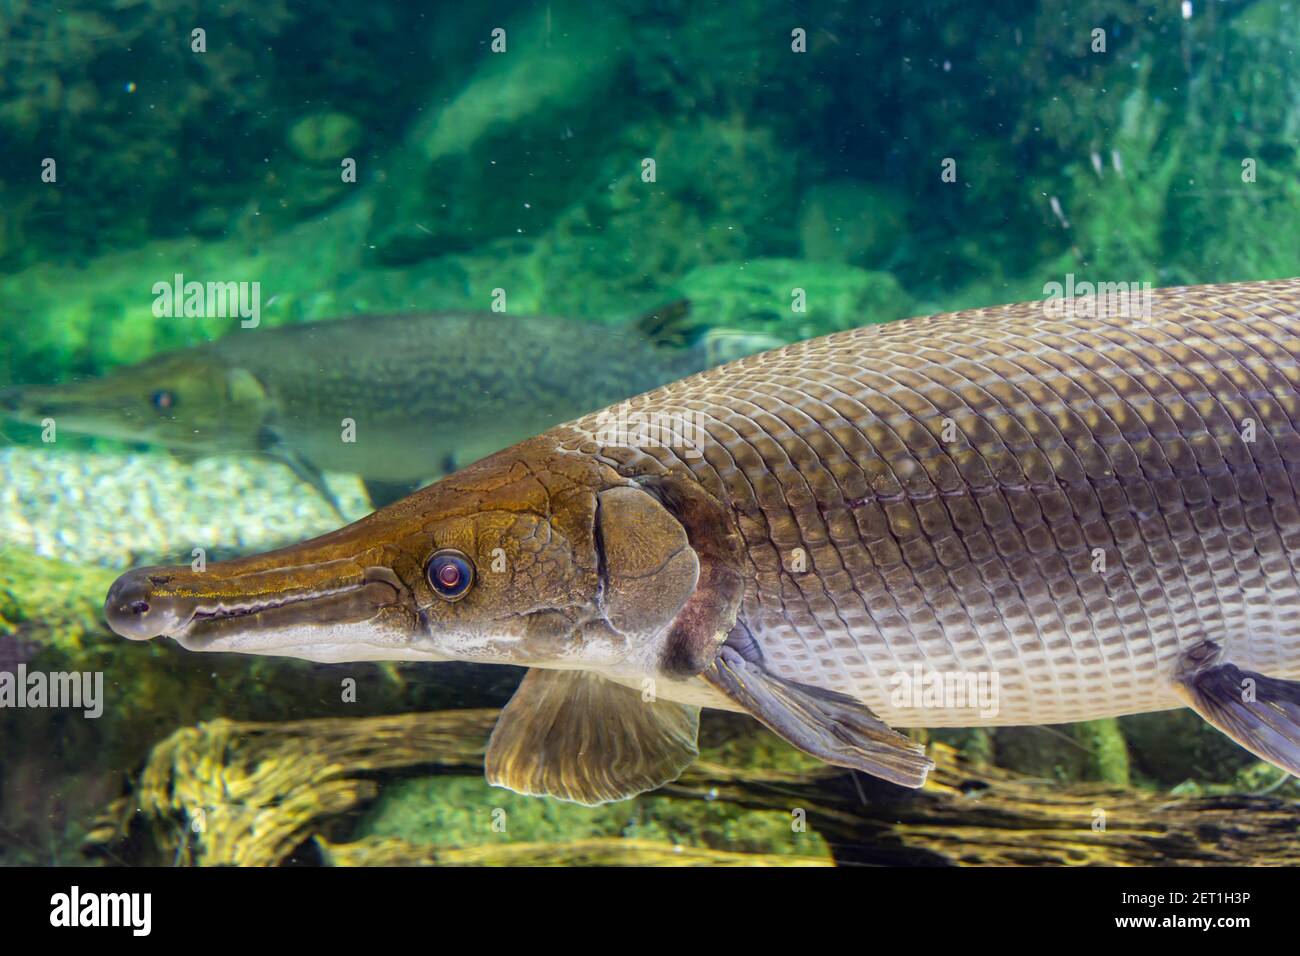 https://c8.alamy.com/comp/2ET1H3P/arapaima-gigas-also-known-as-pirarucu-is-a-species-of-arapaima-native-to-the-basin-of-the-amazon-river-once-believed-to-be-the-sole-species-in-the-2ET1H3P.jpg